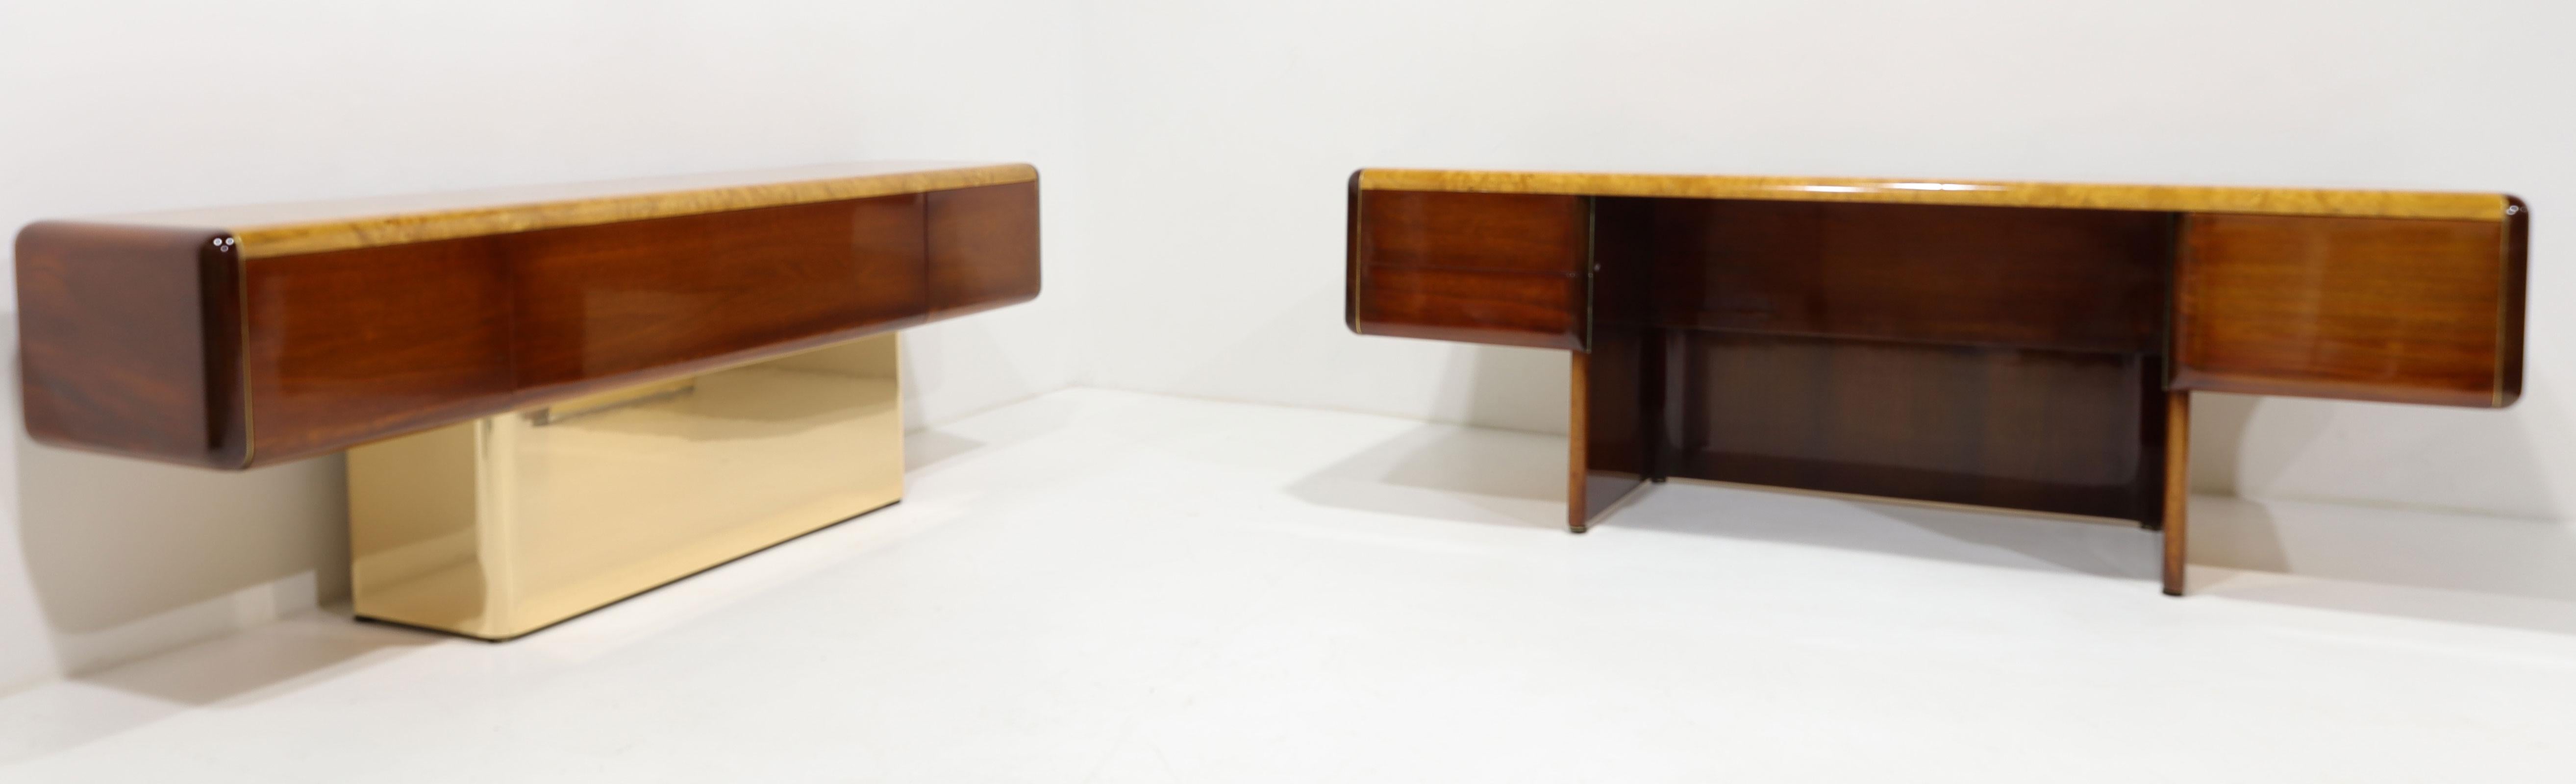 20th Century Vladimir Kagan Design Desk and Credenza in Burl and Mahogany with Brass Base For Sale